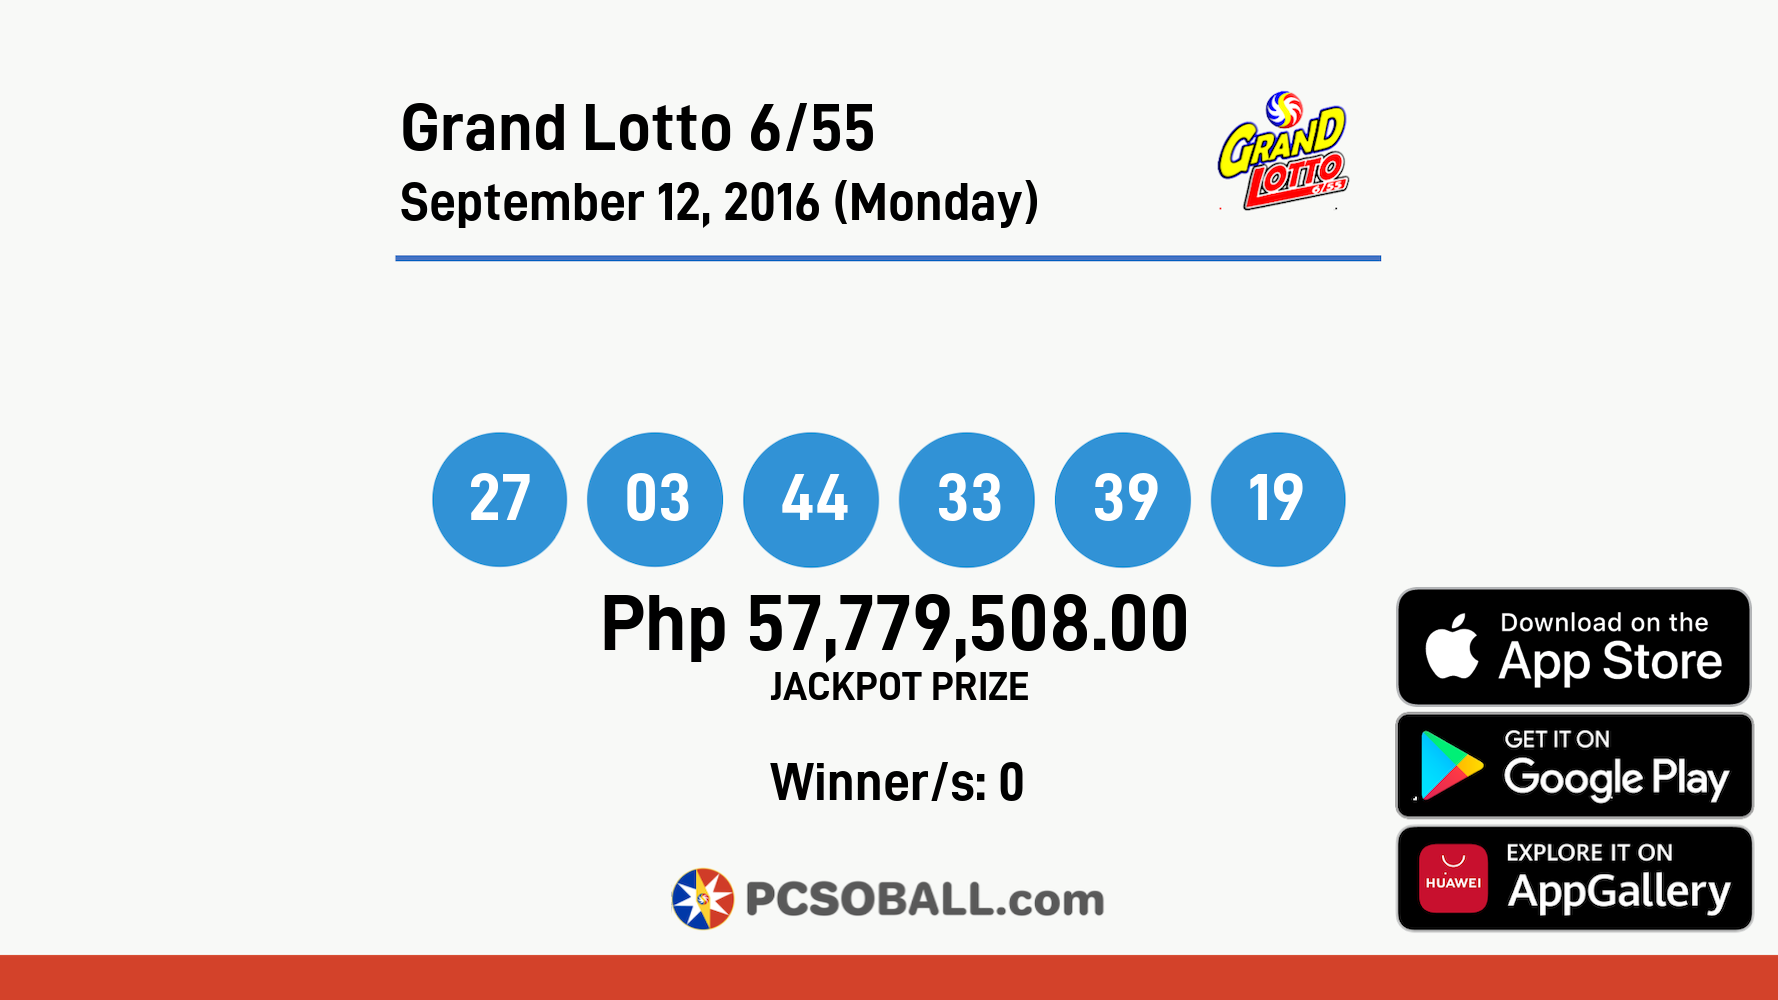 Grand Lotto 6/55 September 12, 2016 (Monday) Result